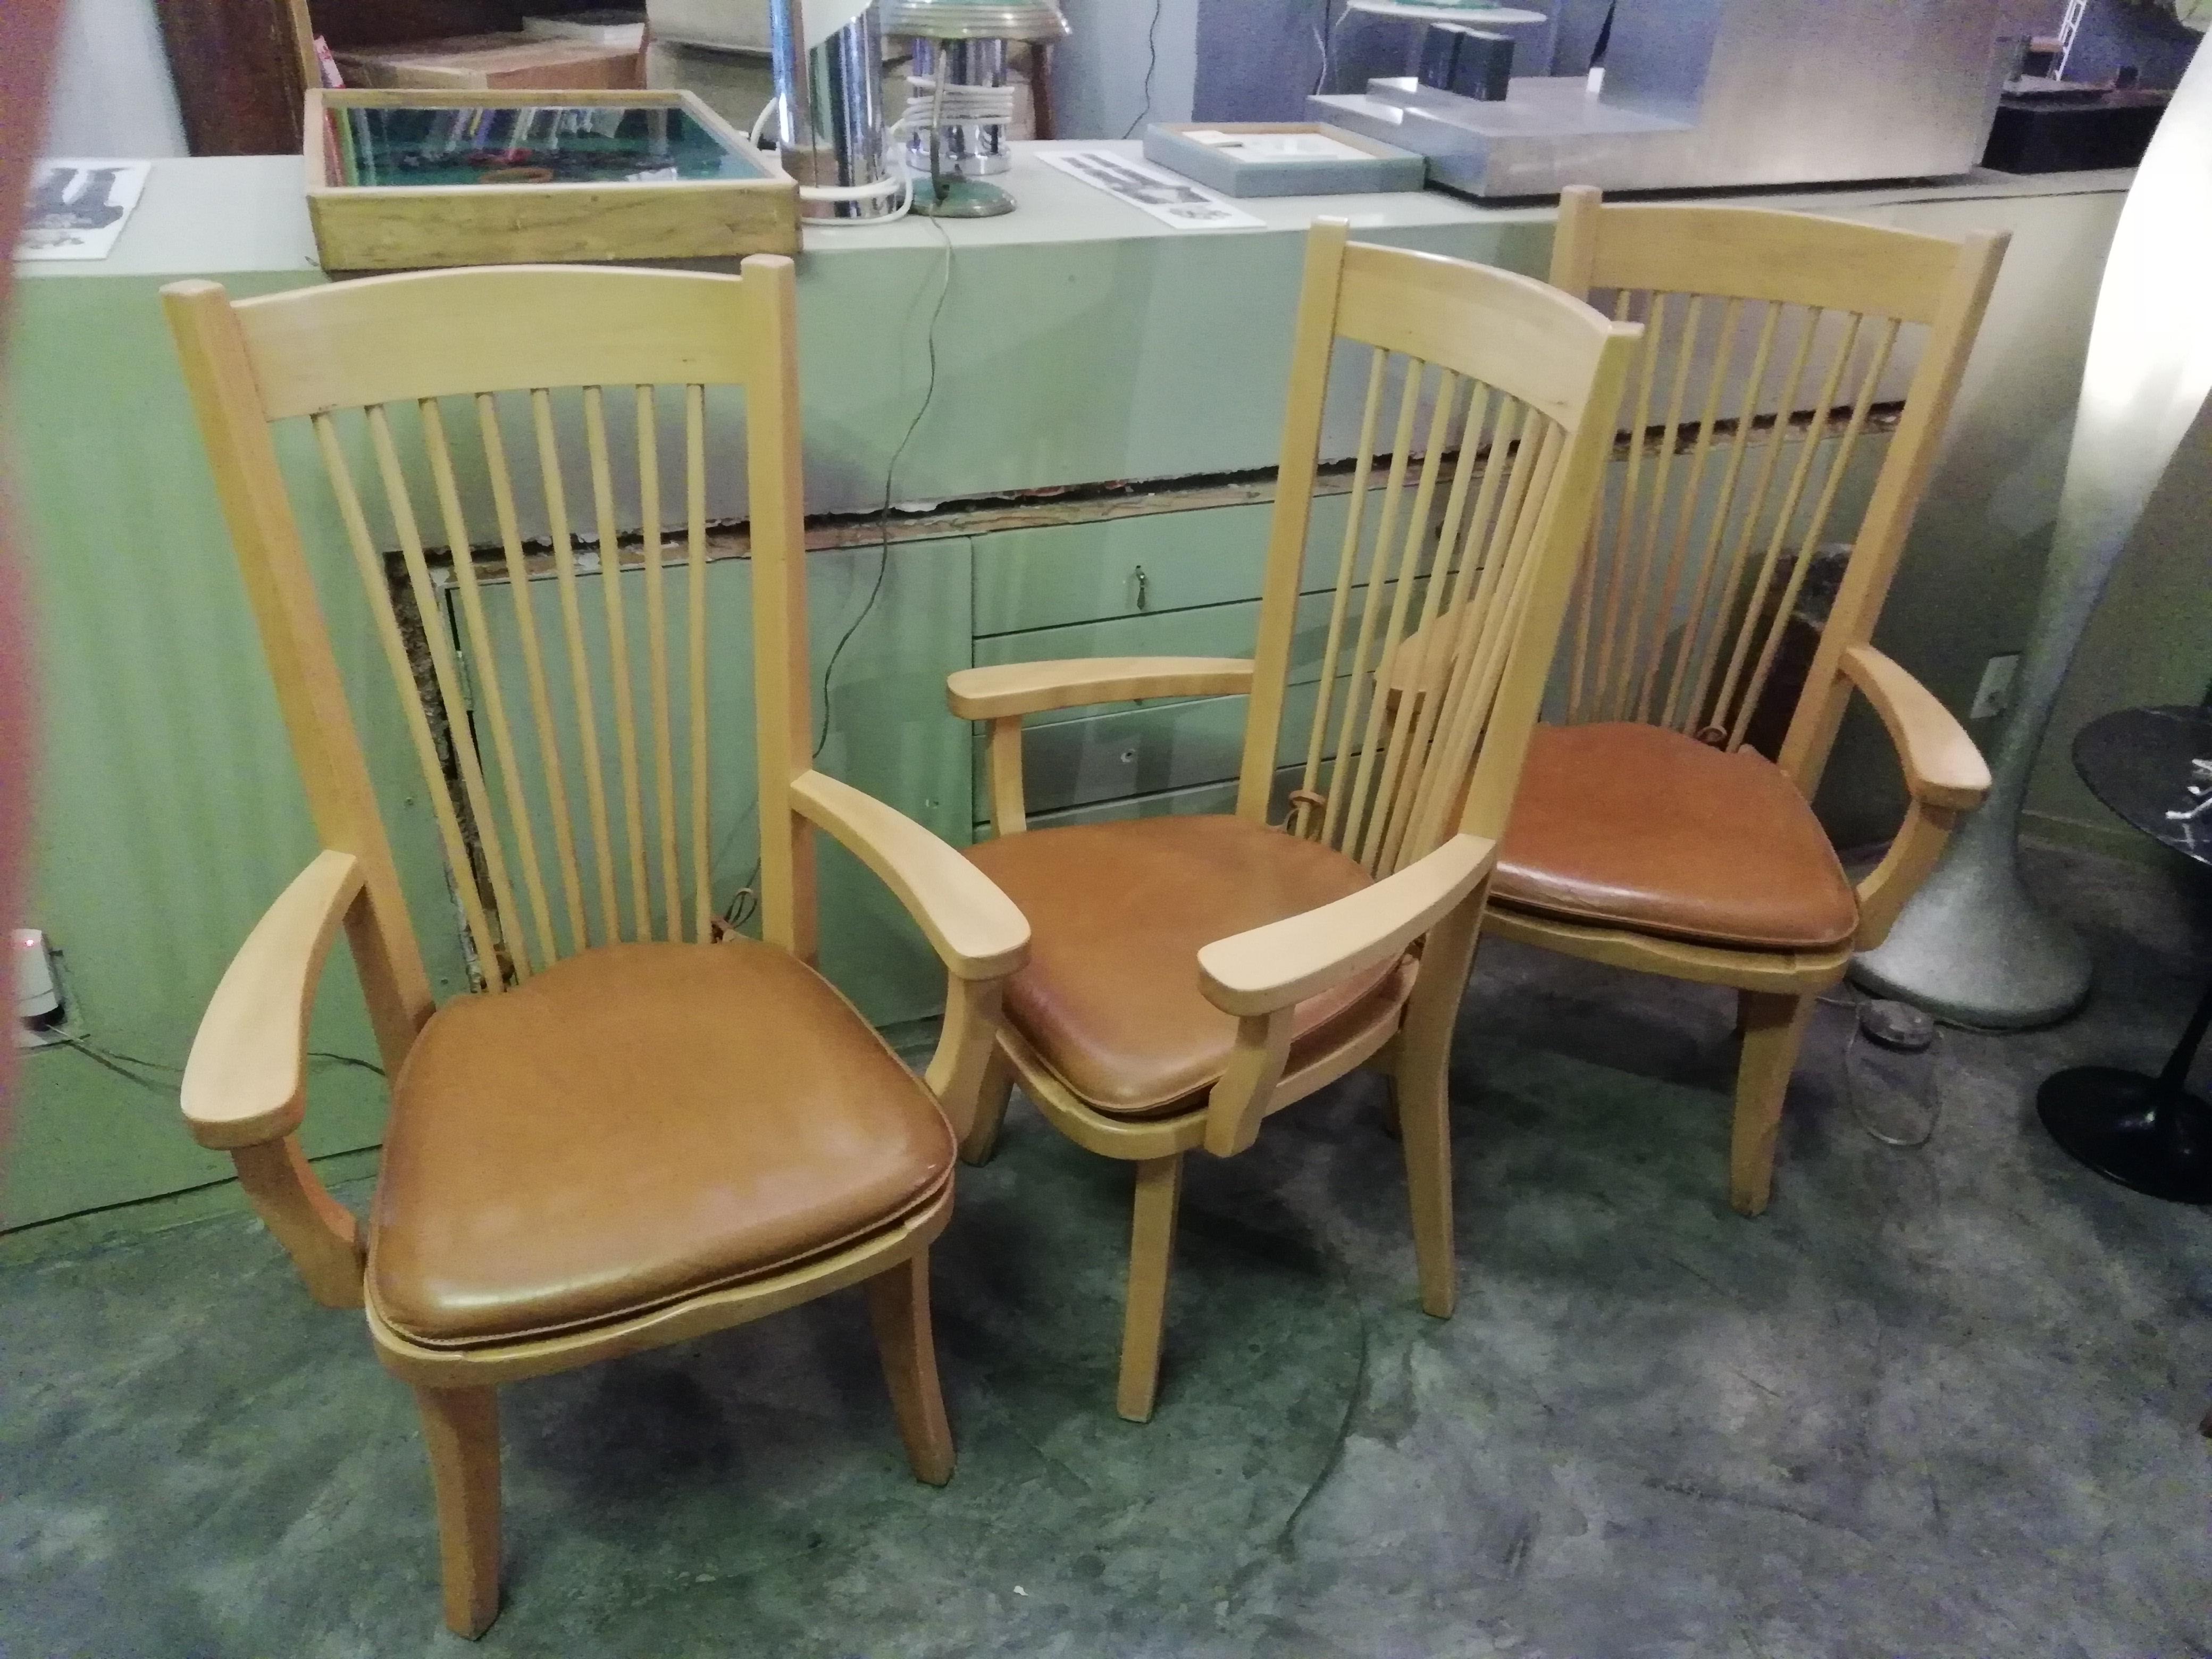 Rare set of 6 Mexican white oak armchairs by Ricardo Legorreta with high slatted backs and sabre-shaped legs. All chairs include a brown leather cushion.

 